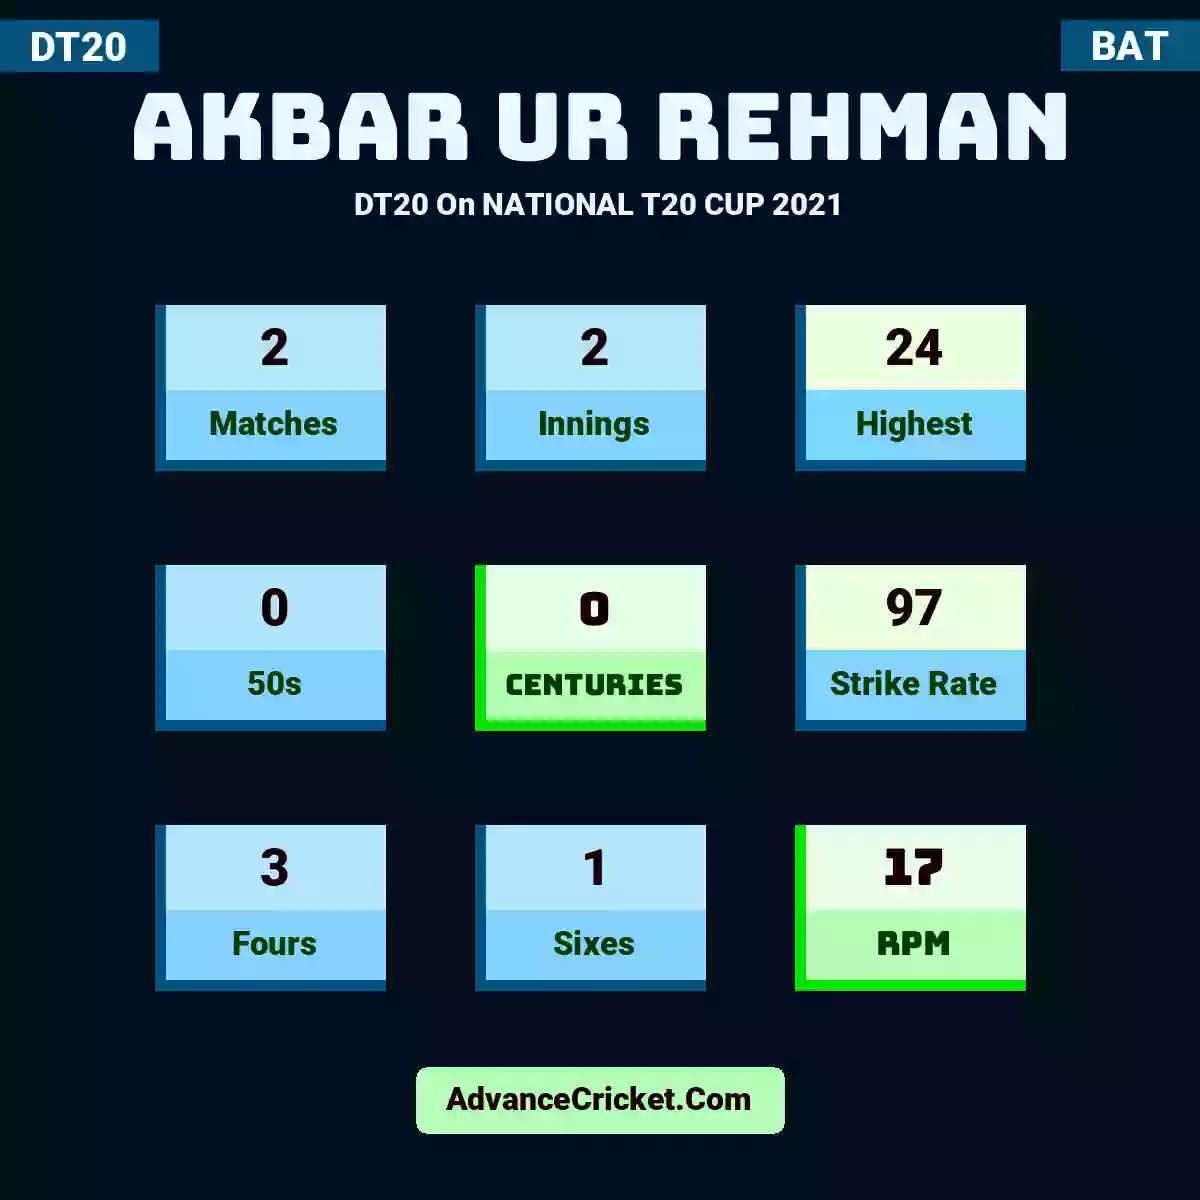 Akbar ur Rehman DT20  On NATIONAL T20 CUP 2021, Akbar ur Rehman played 2 matches, scored 24 runs as highest, 0 half-centuries, and 0 centuries, with a strike rate of 97. A.Rehman hit 3 fours and 1 sixes, with an RPM of 17.